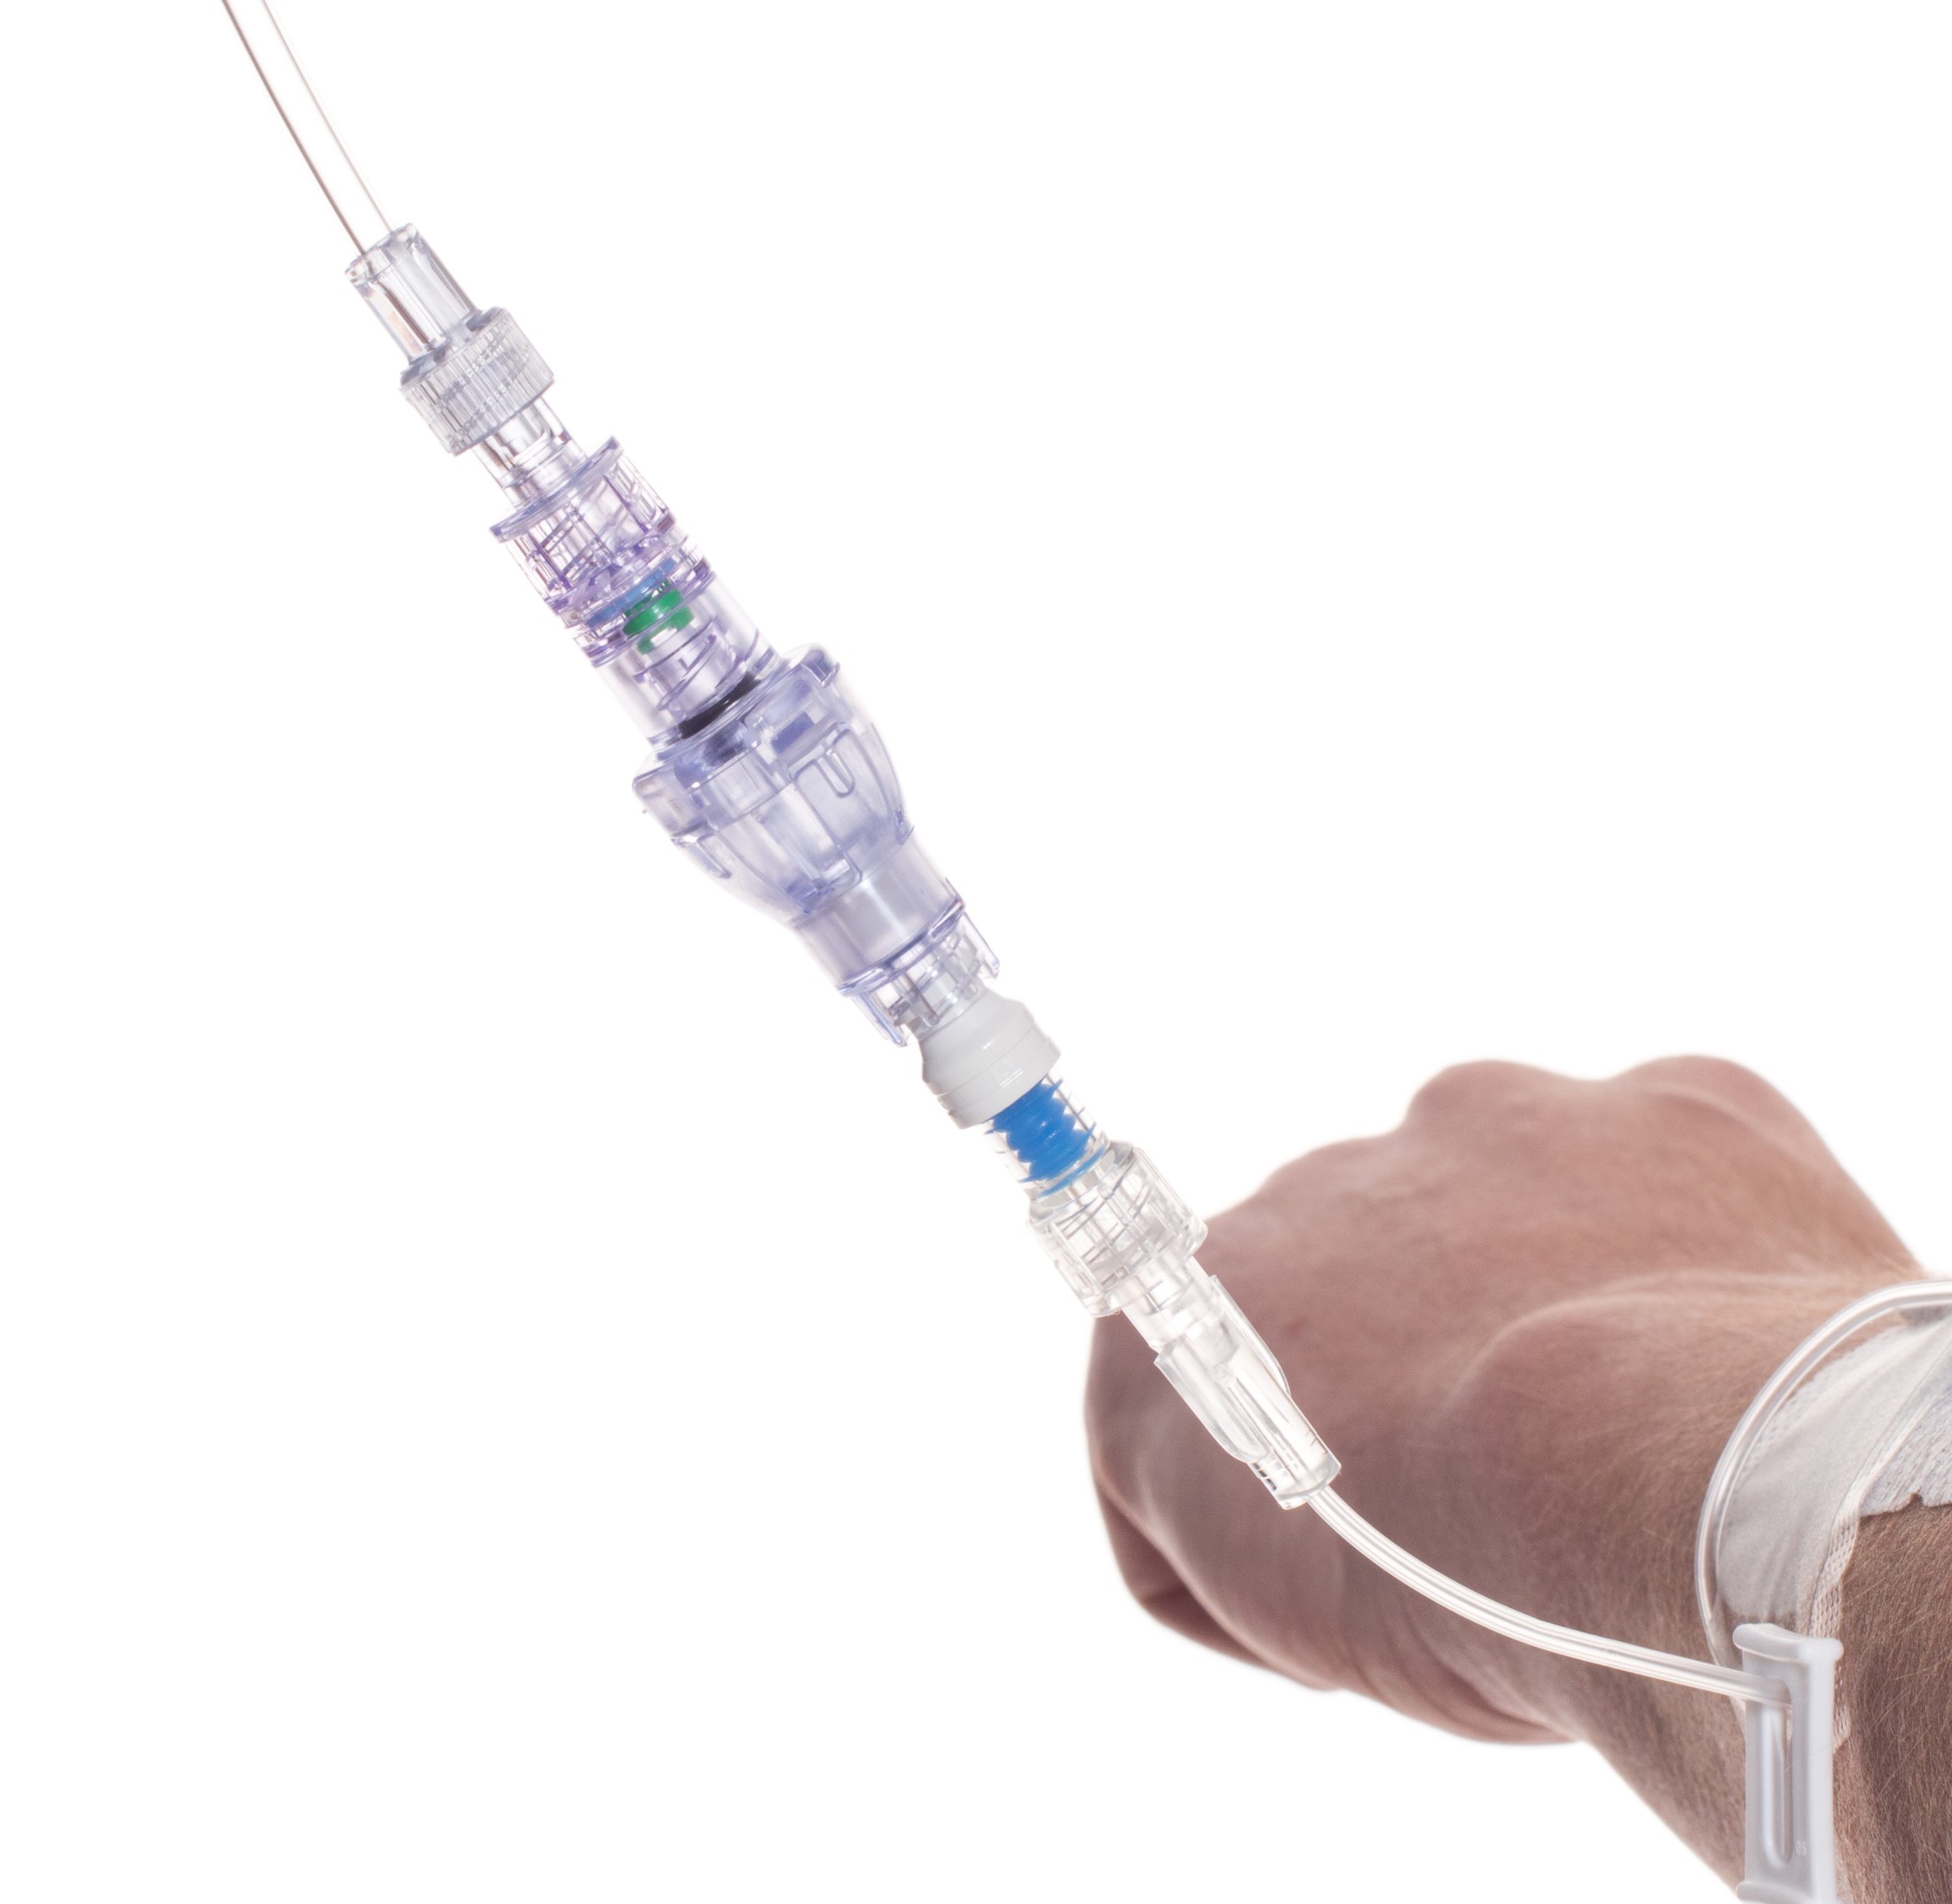 SafeBreak installed in a peripheral IV